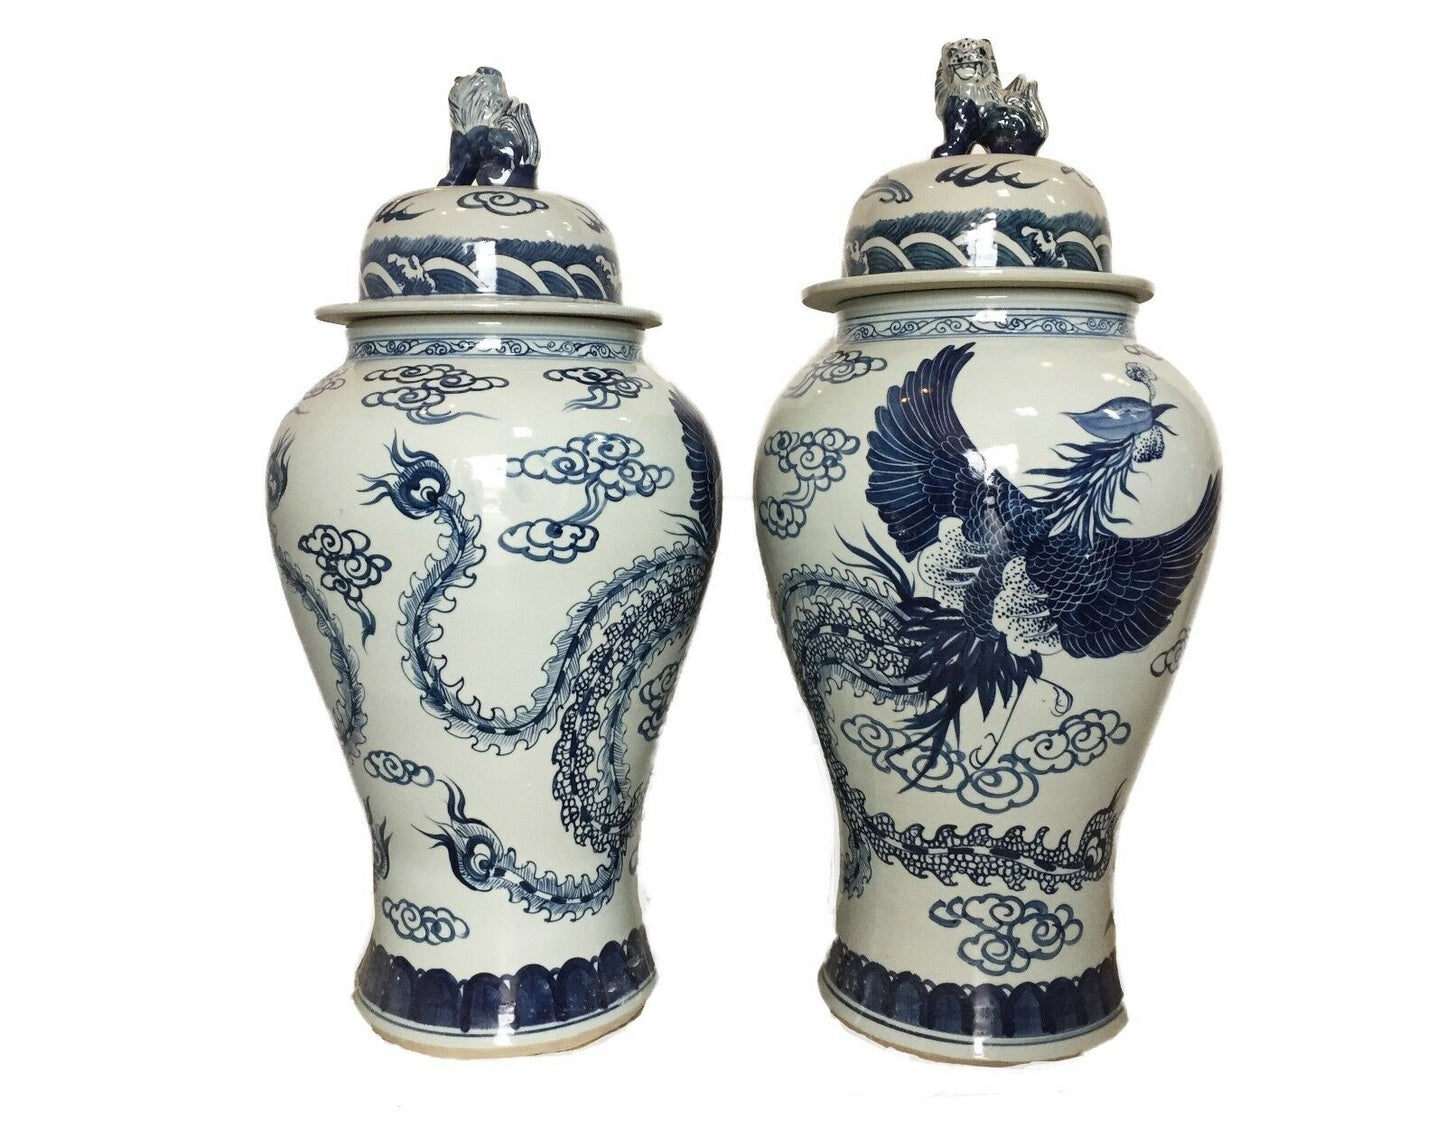 #942 Mansion Size Chinoiserie B & W Porcelain Ginger Jars - a Pair 35" H